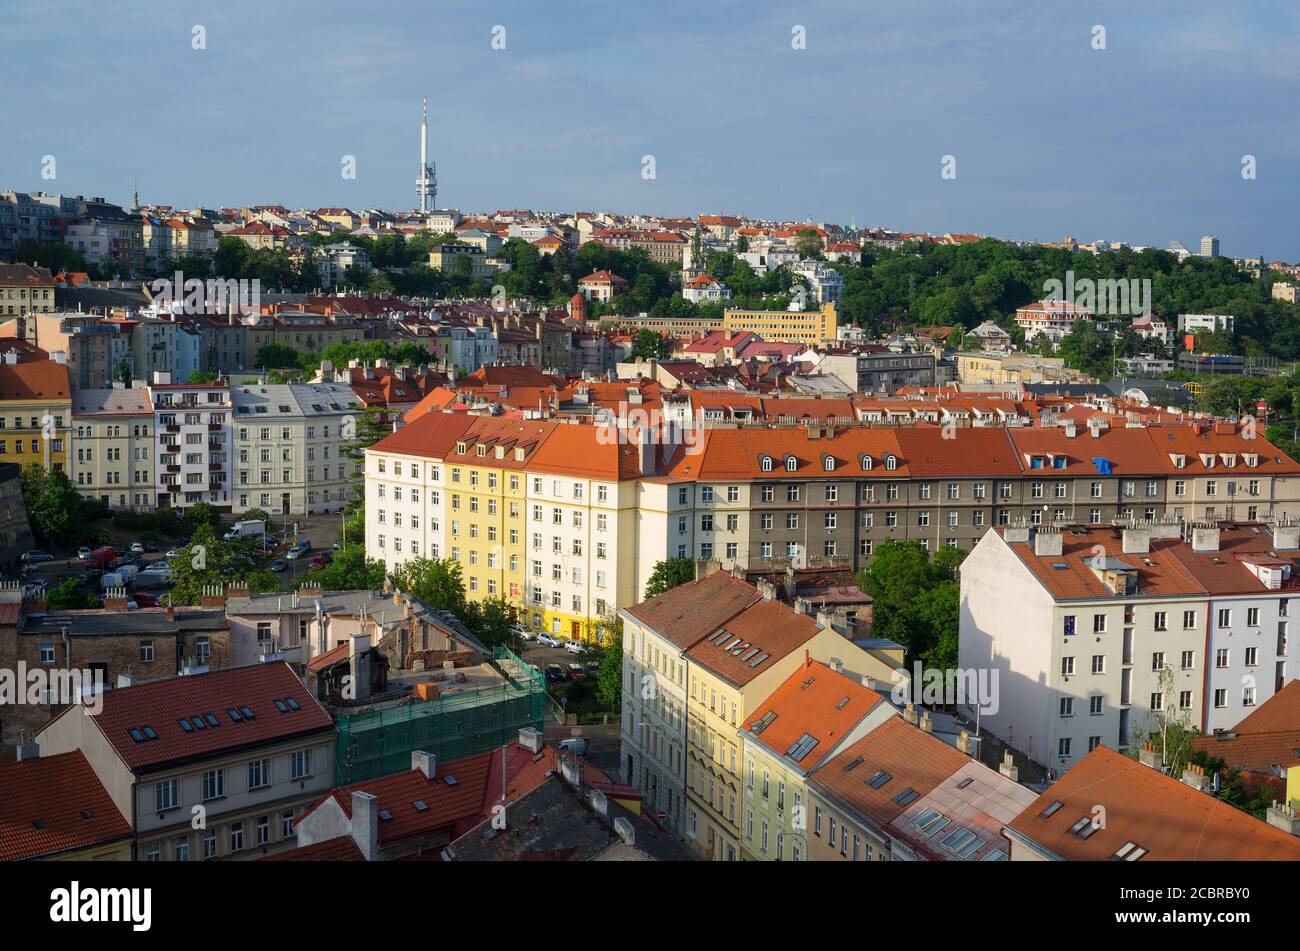 Vinohrady district, Zizkov television communications tower and transmitter in the background, Prague, Czech Republic / Czechia - aerial view of street Stock Photo